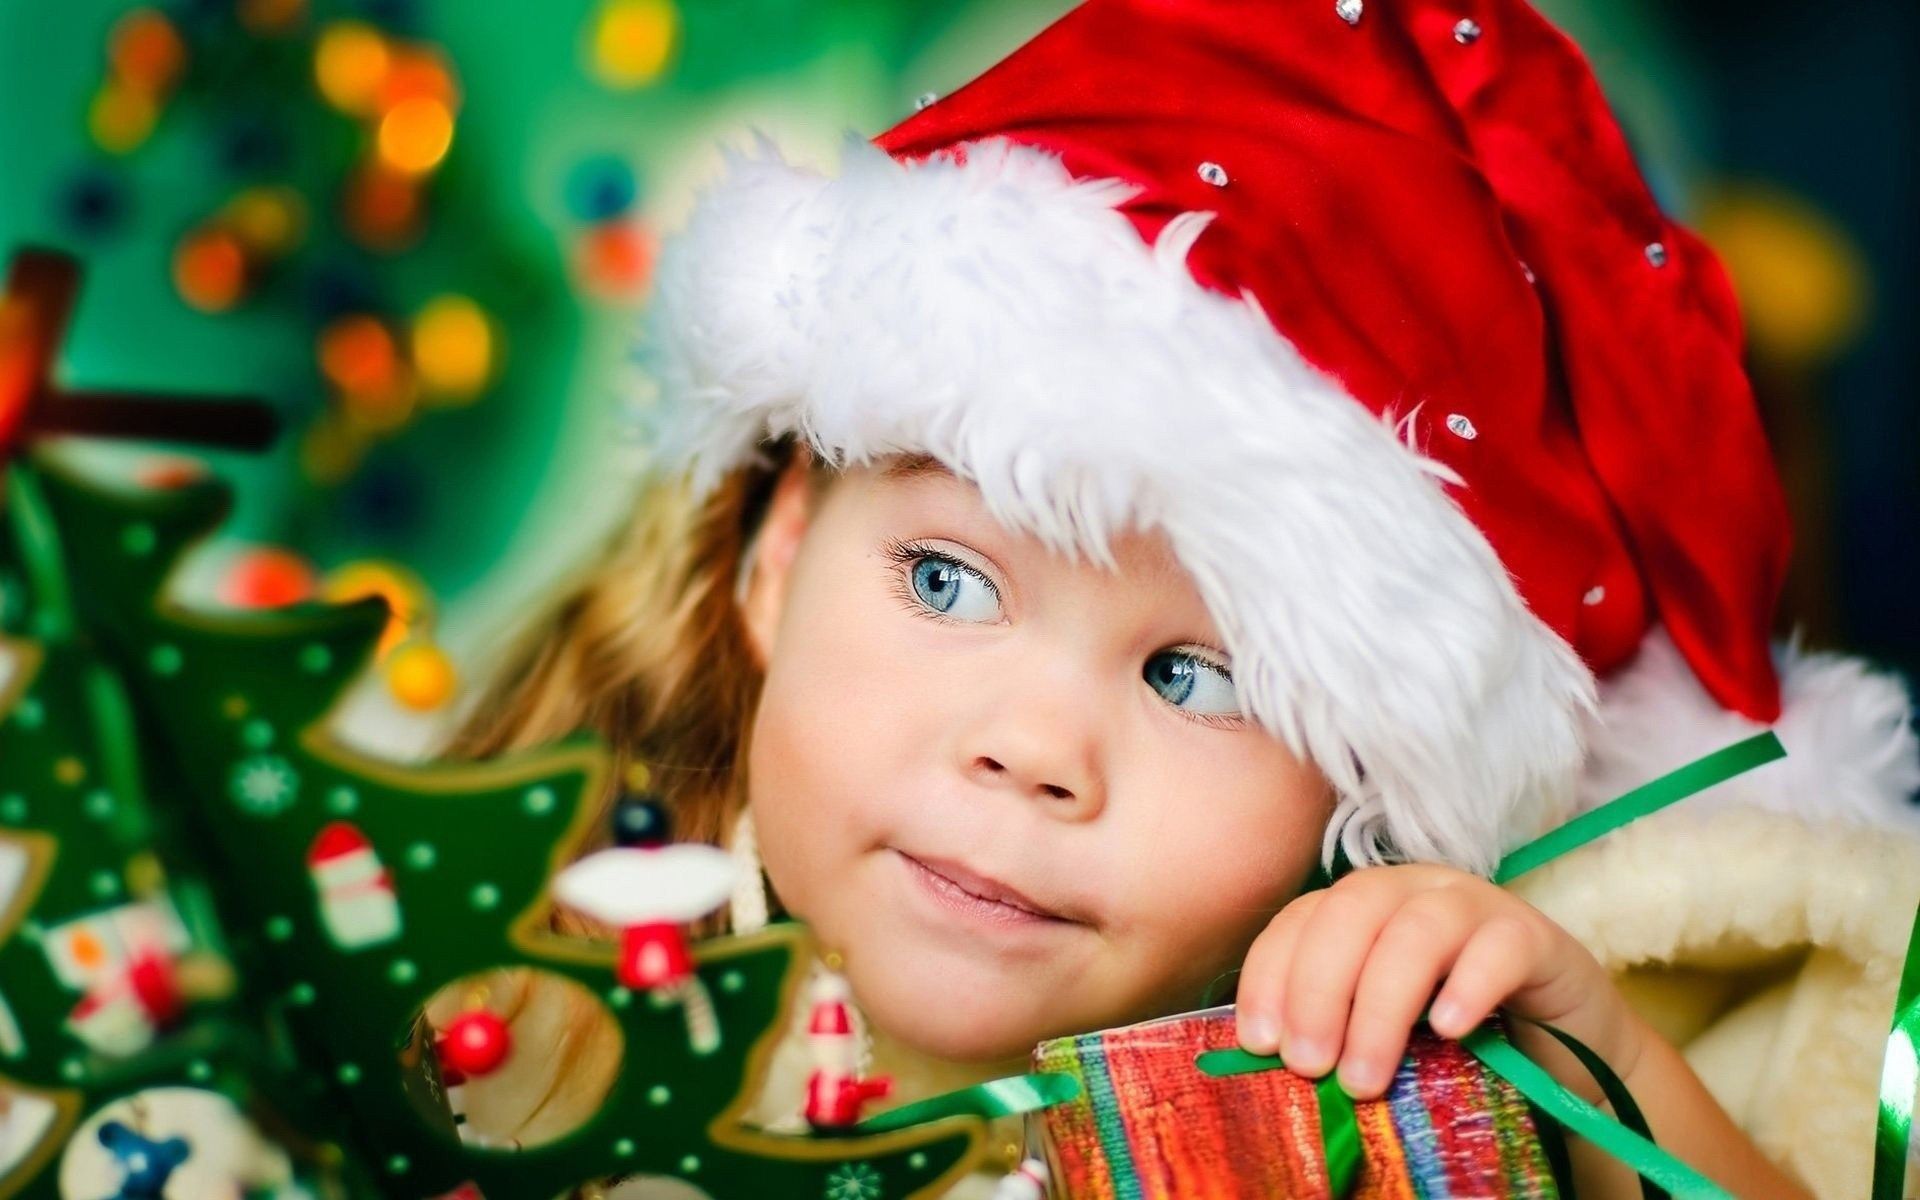 Free download Download Merry Christmas Wallpaper Cute Baby Wallpaper HD FREE [1920x1200] for your Desktop, Mobile & Tablet. Explore Cute Merry Christmas Wallpaper. Christmas Wallpaper For Desktop, Free Christmas